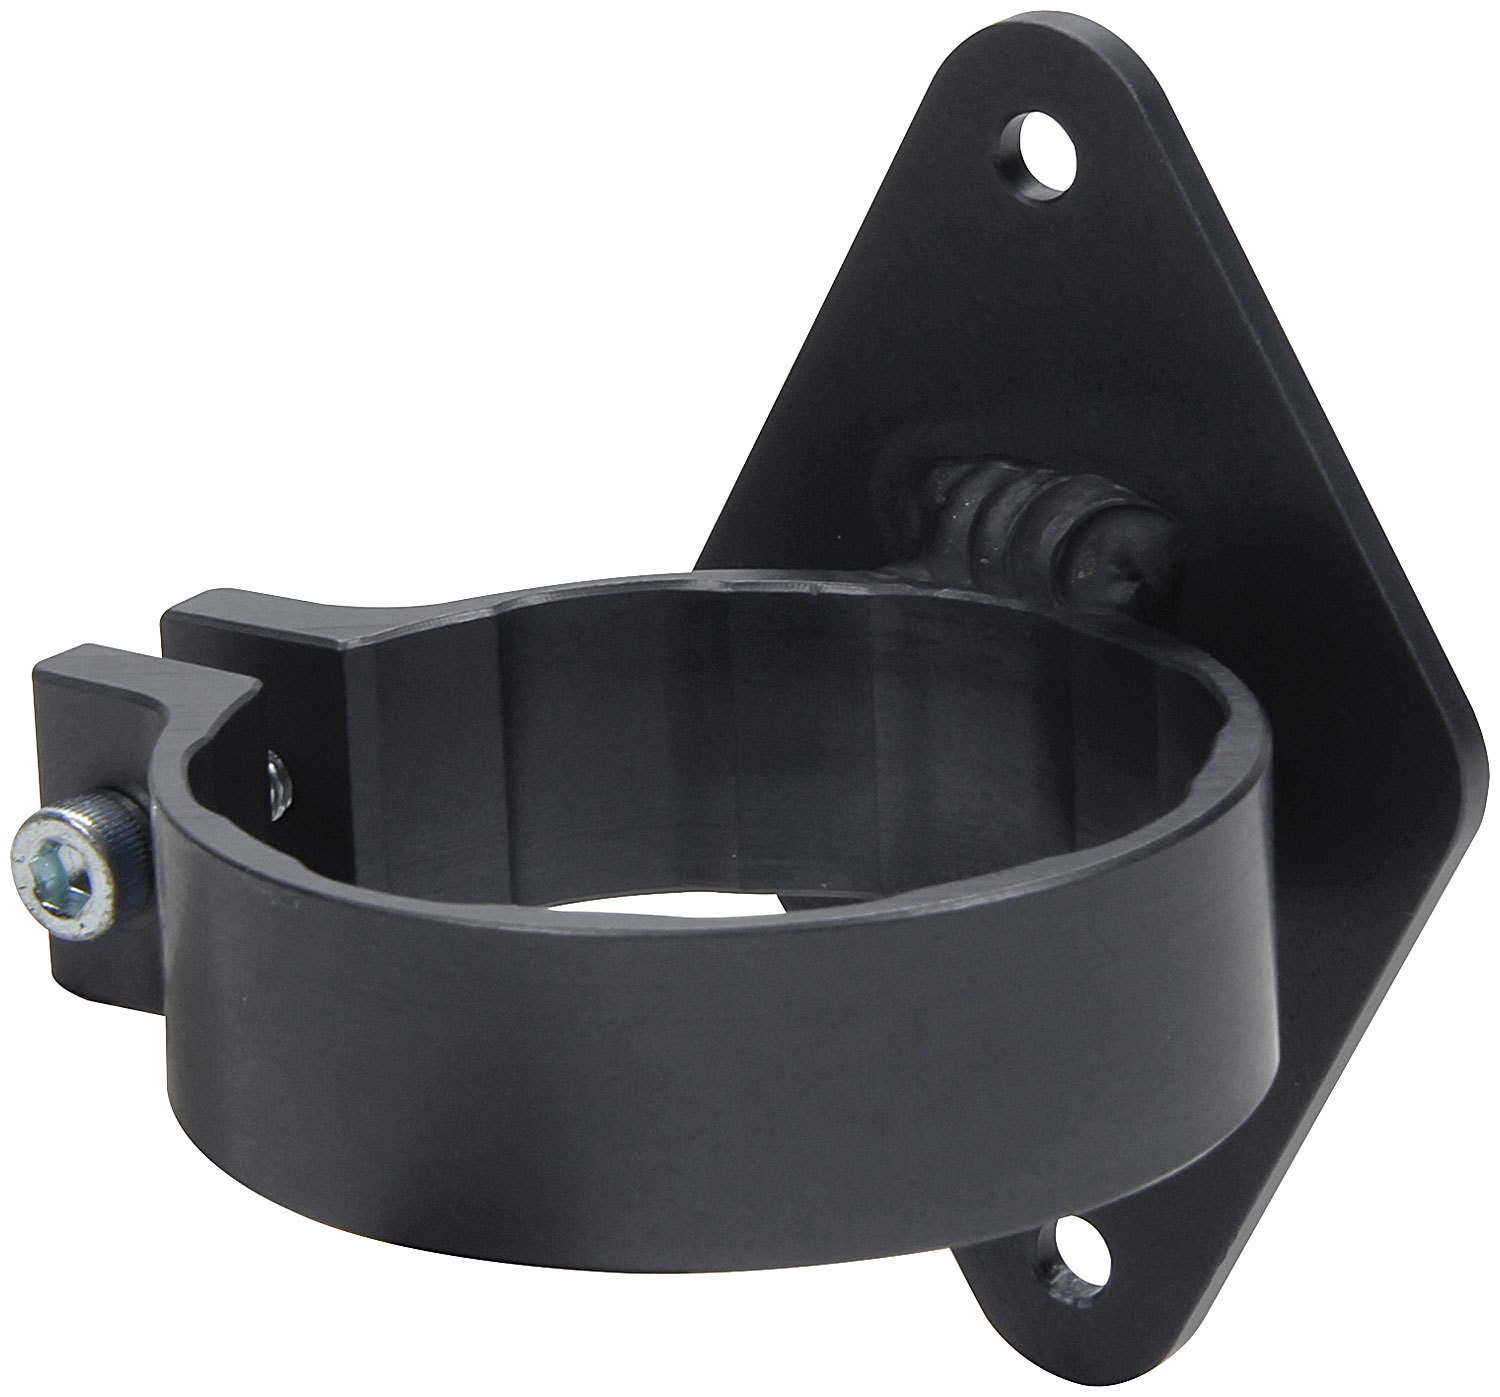 Allstar Performance 81324 Ignition Coil Bracket, Canister Style, Remote Mount, Aluminum, Black Anodized, Universal, Each